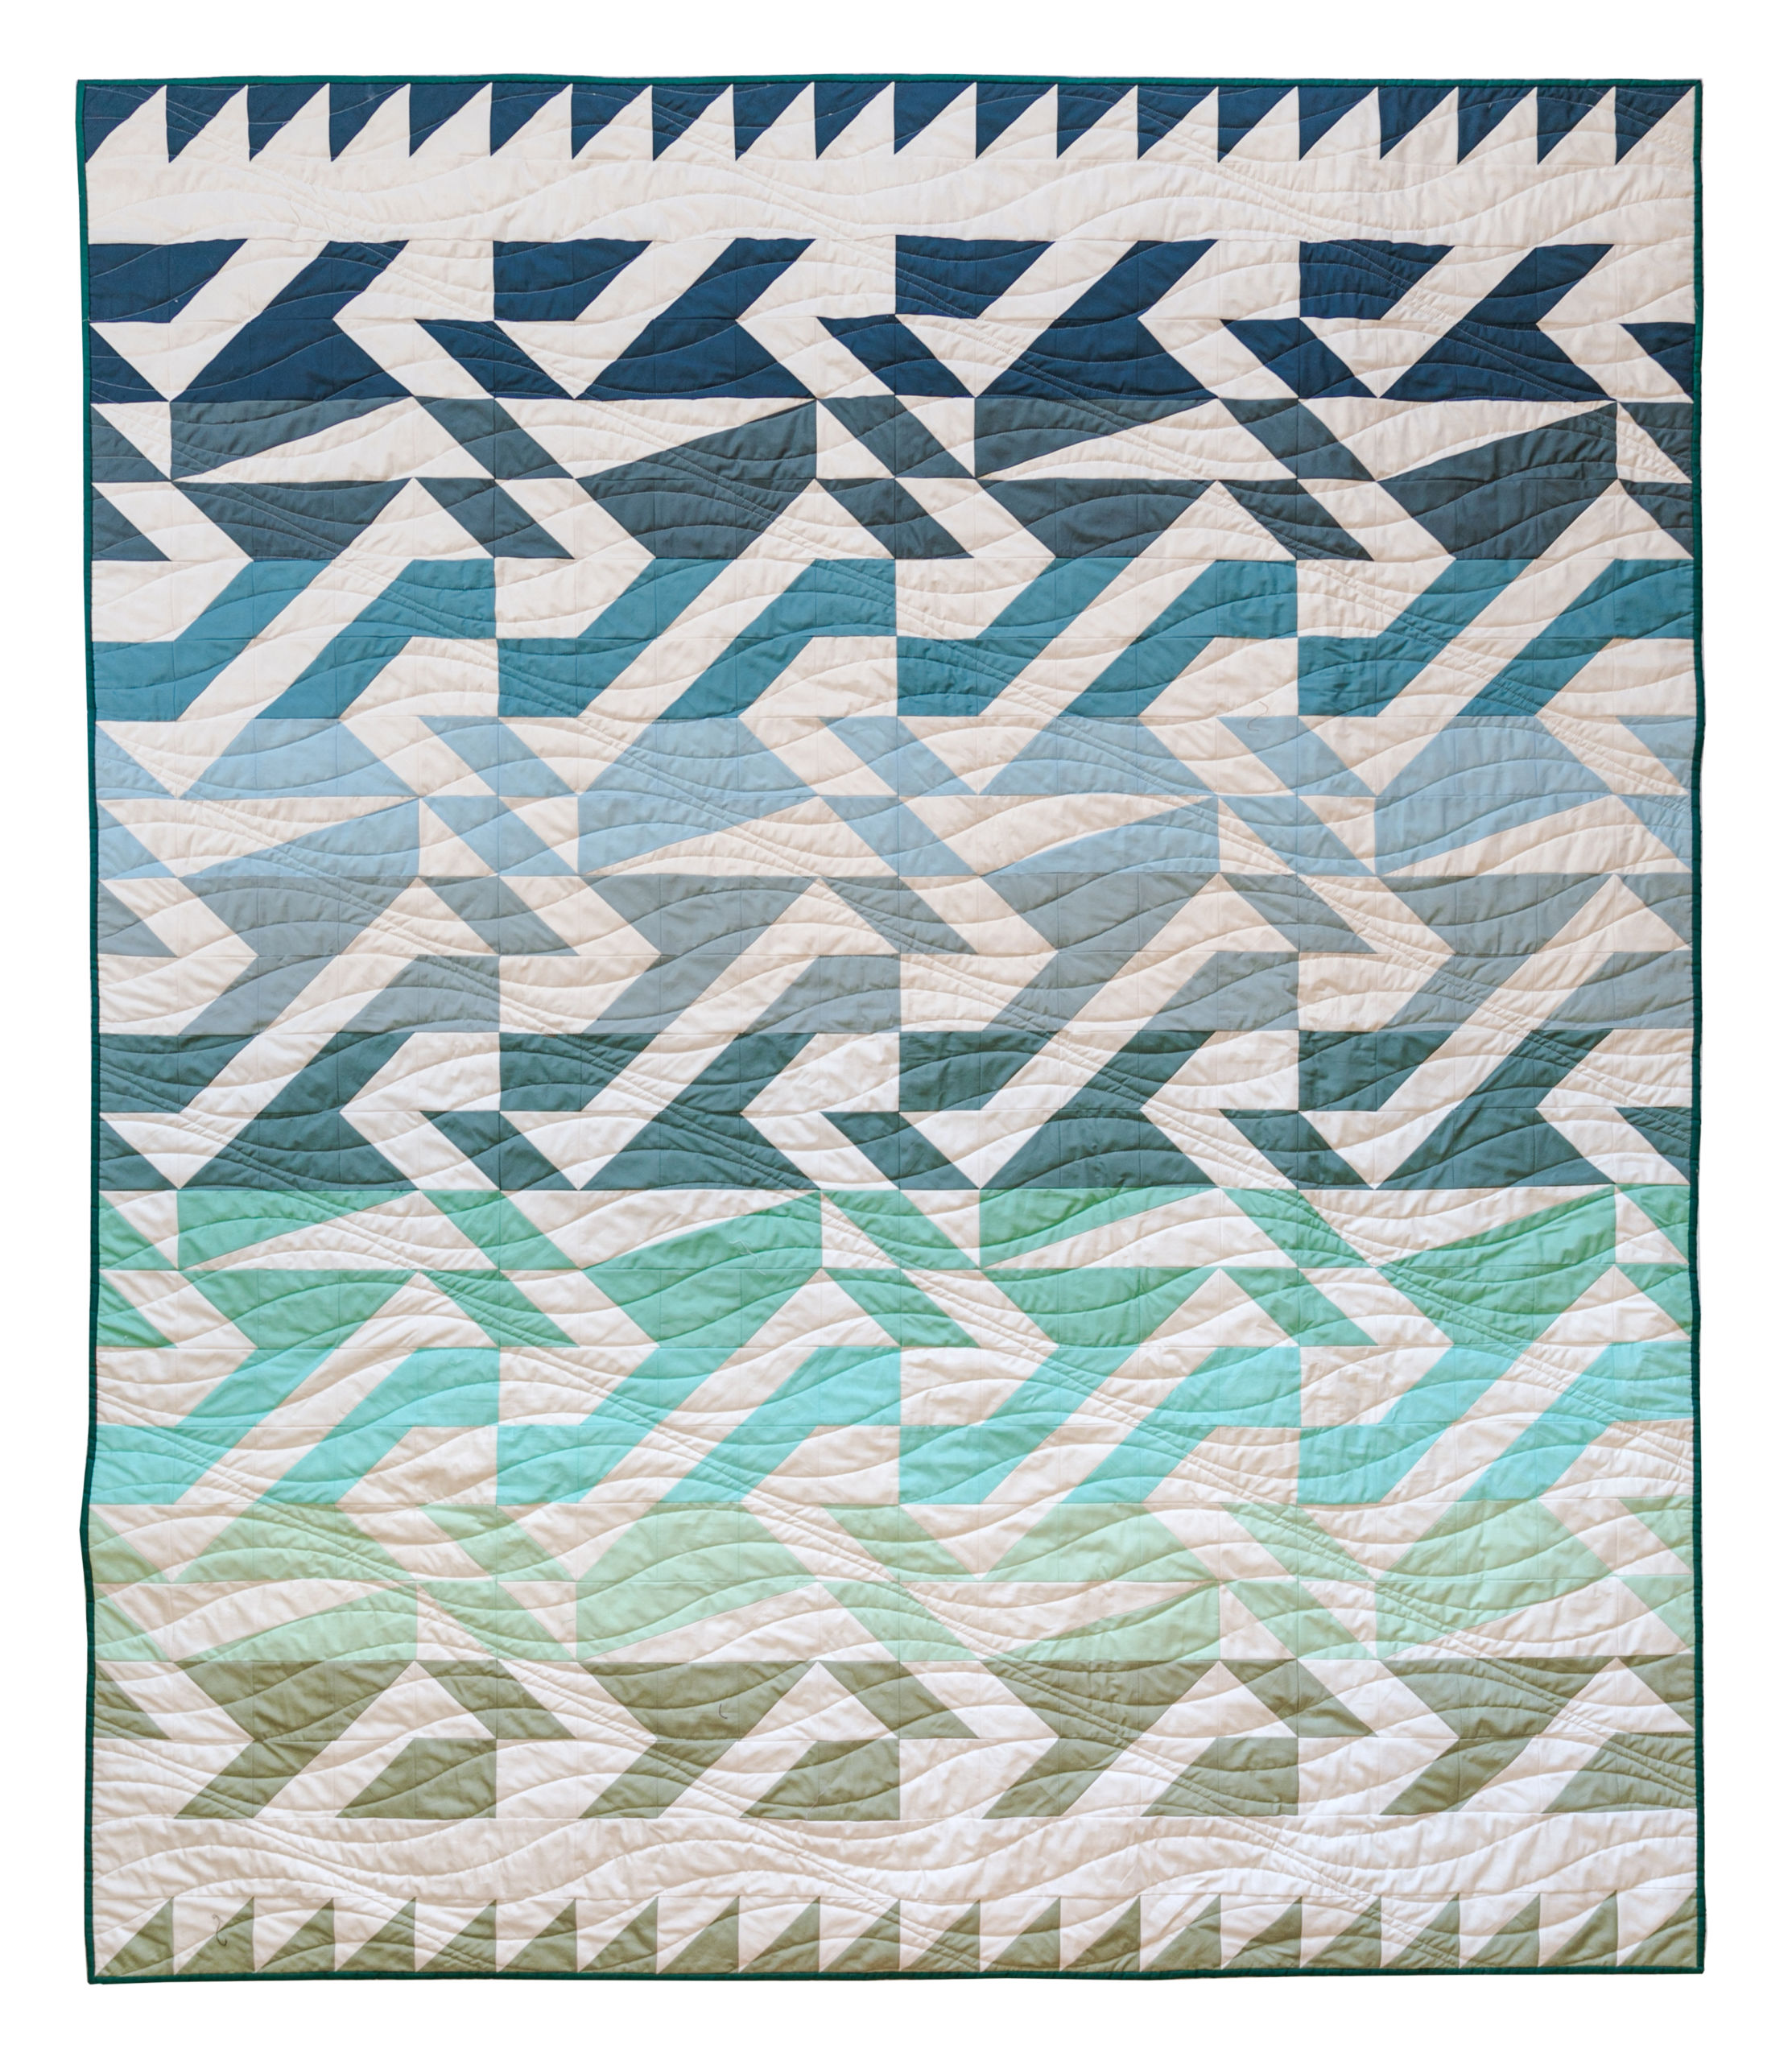 The Voyage quilt sew along is a community experience! Let's make this modern quilt together - one week at a time. suzyquilts.com #quiltalong #quiltpattern